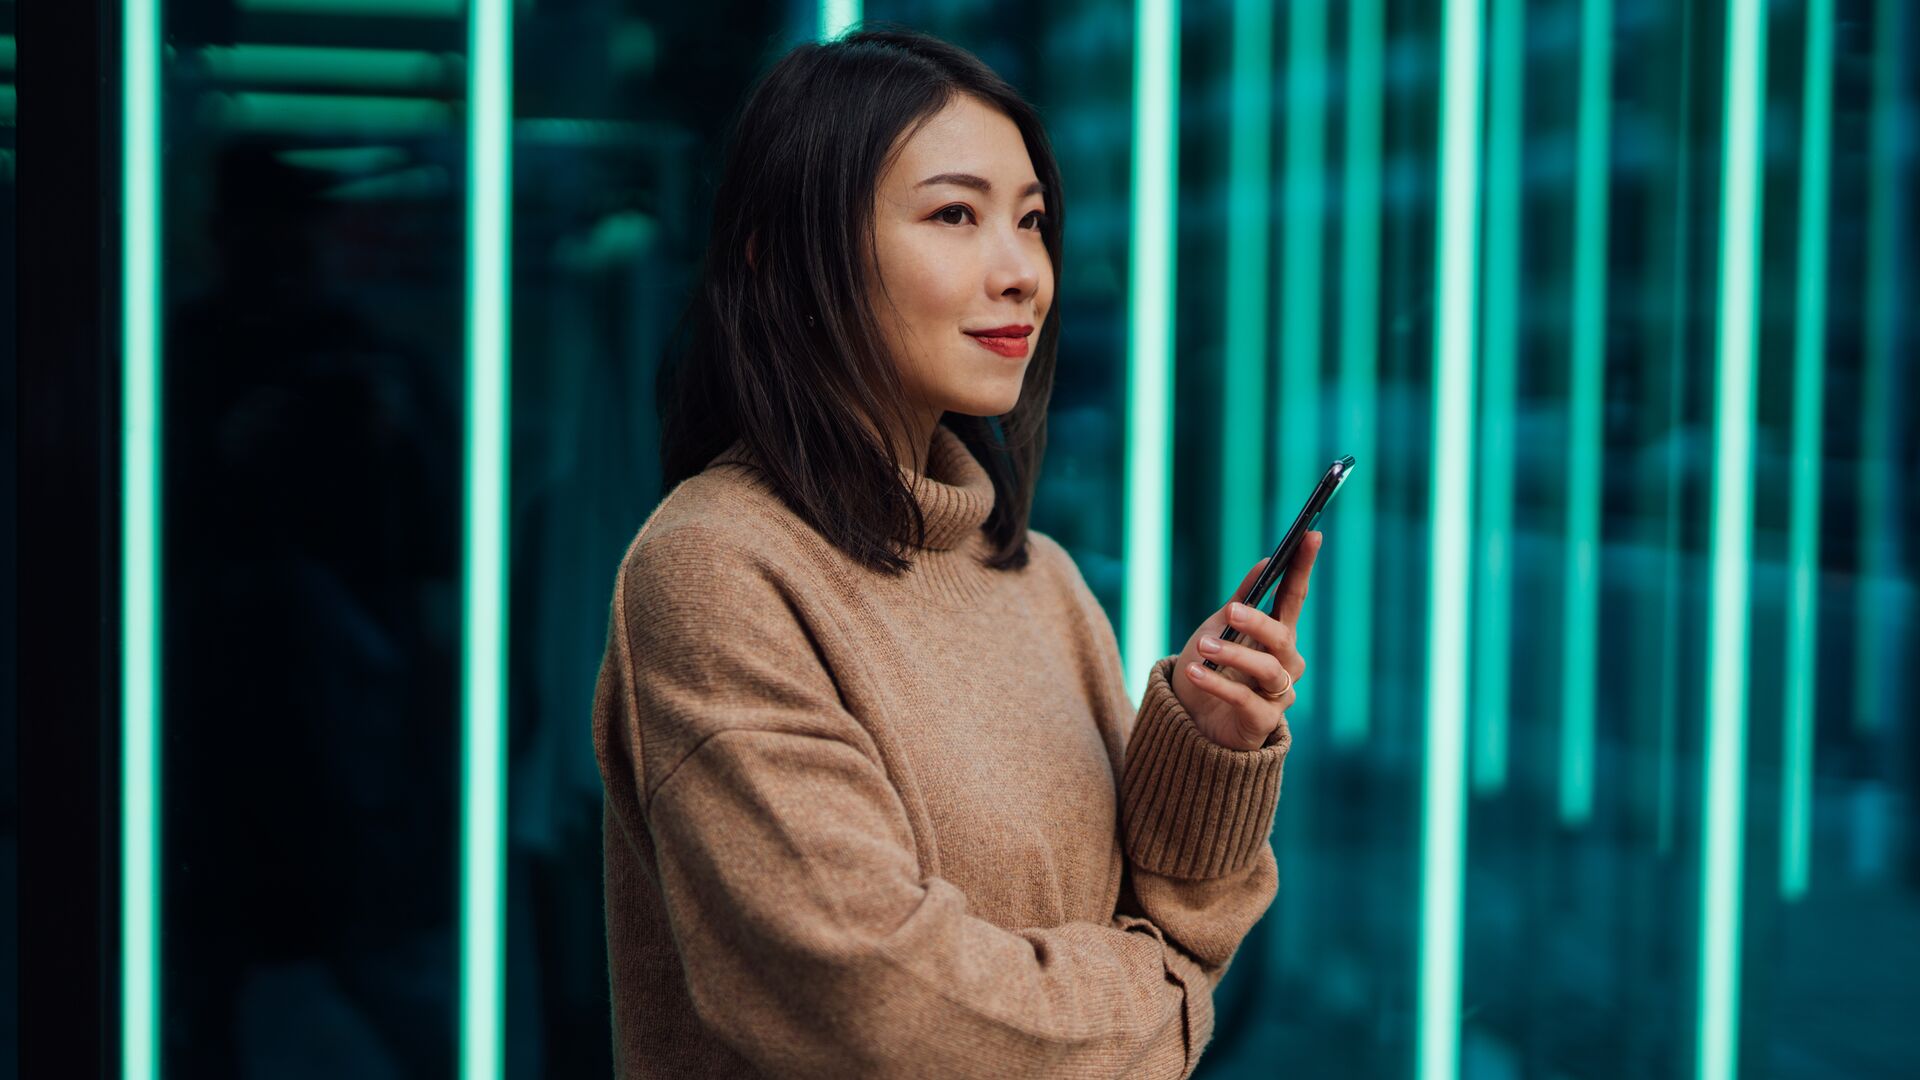 Woman using a mobile phone in front of a neon blue-green lit space.